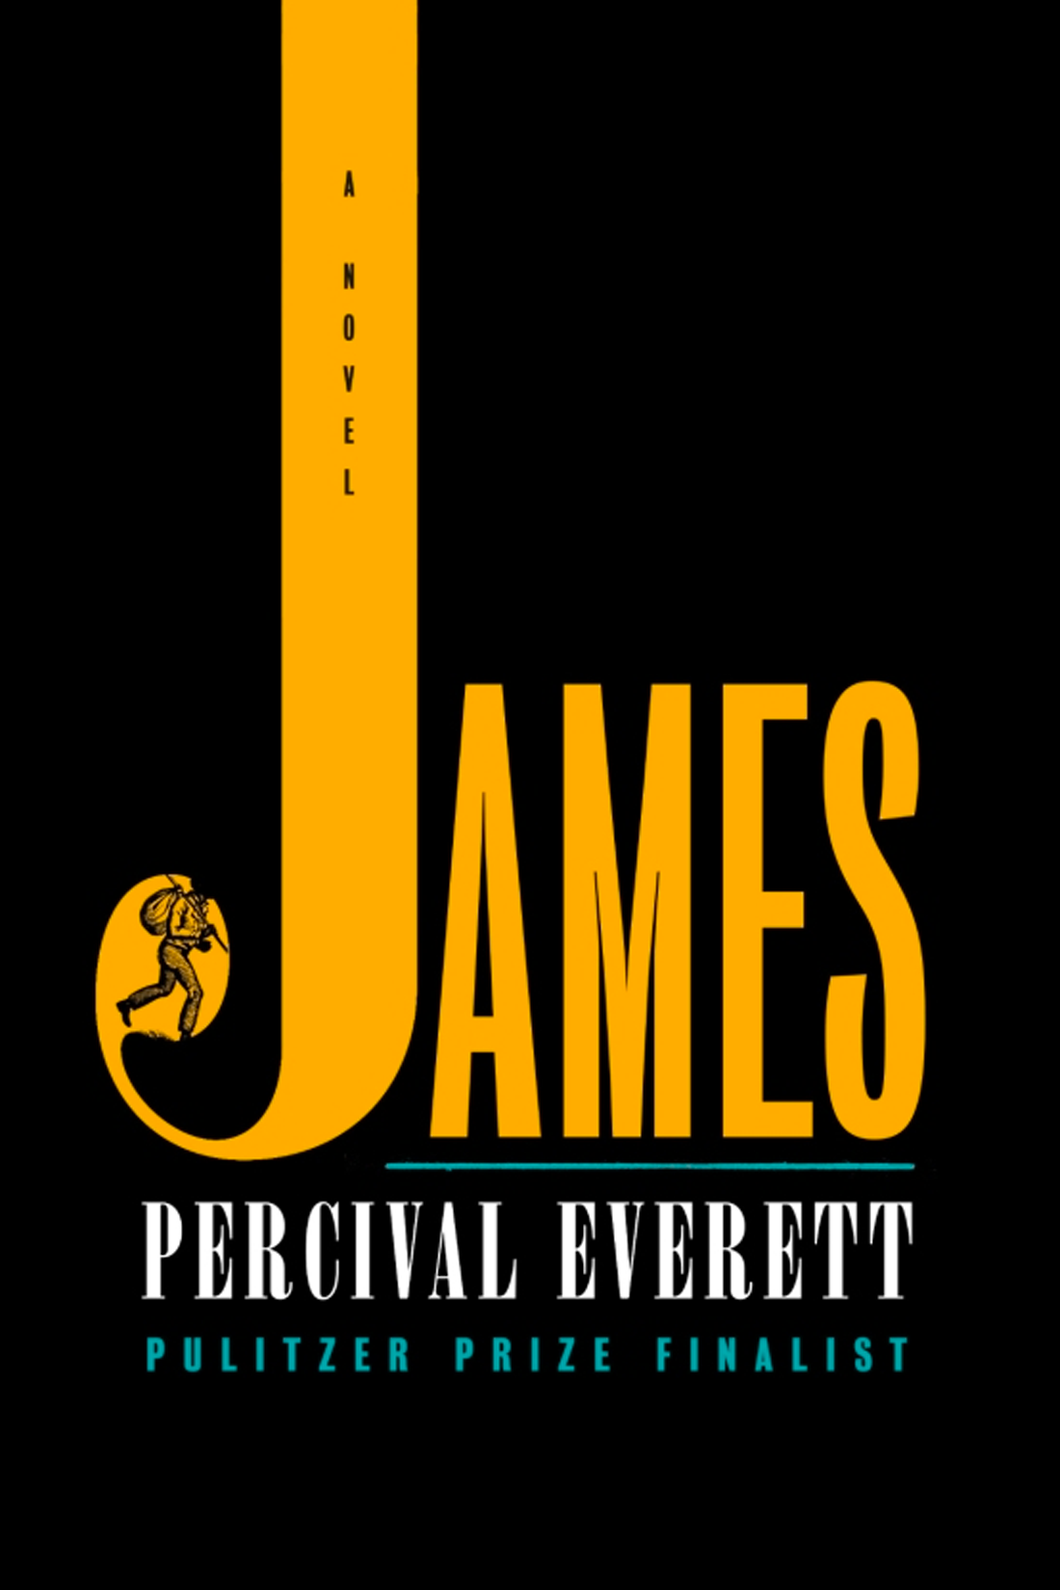 James by Percivil Everett / BOOK OR BUNDLE - Starting at $28!